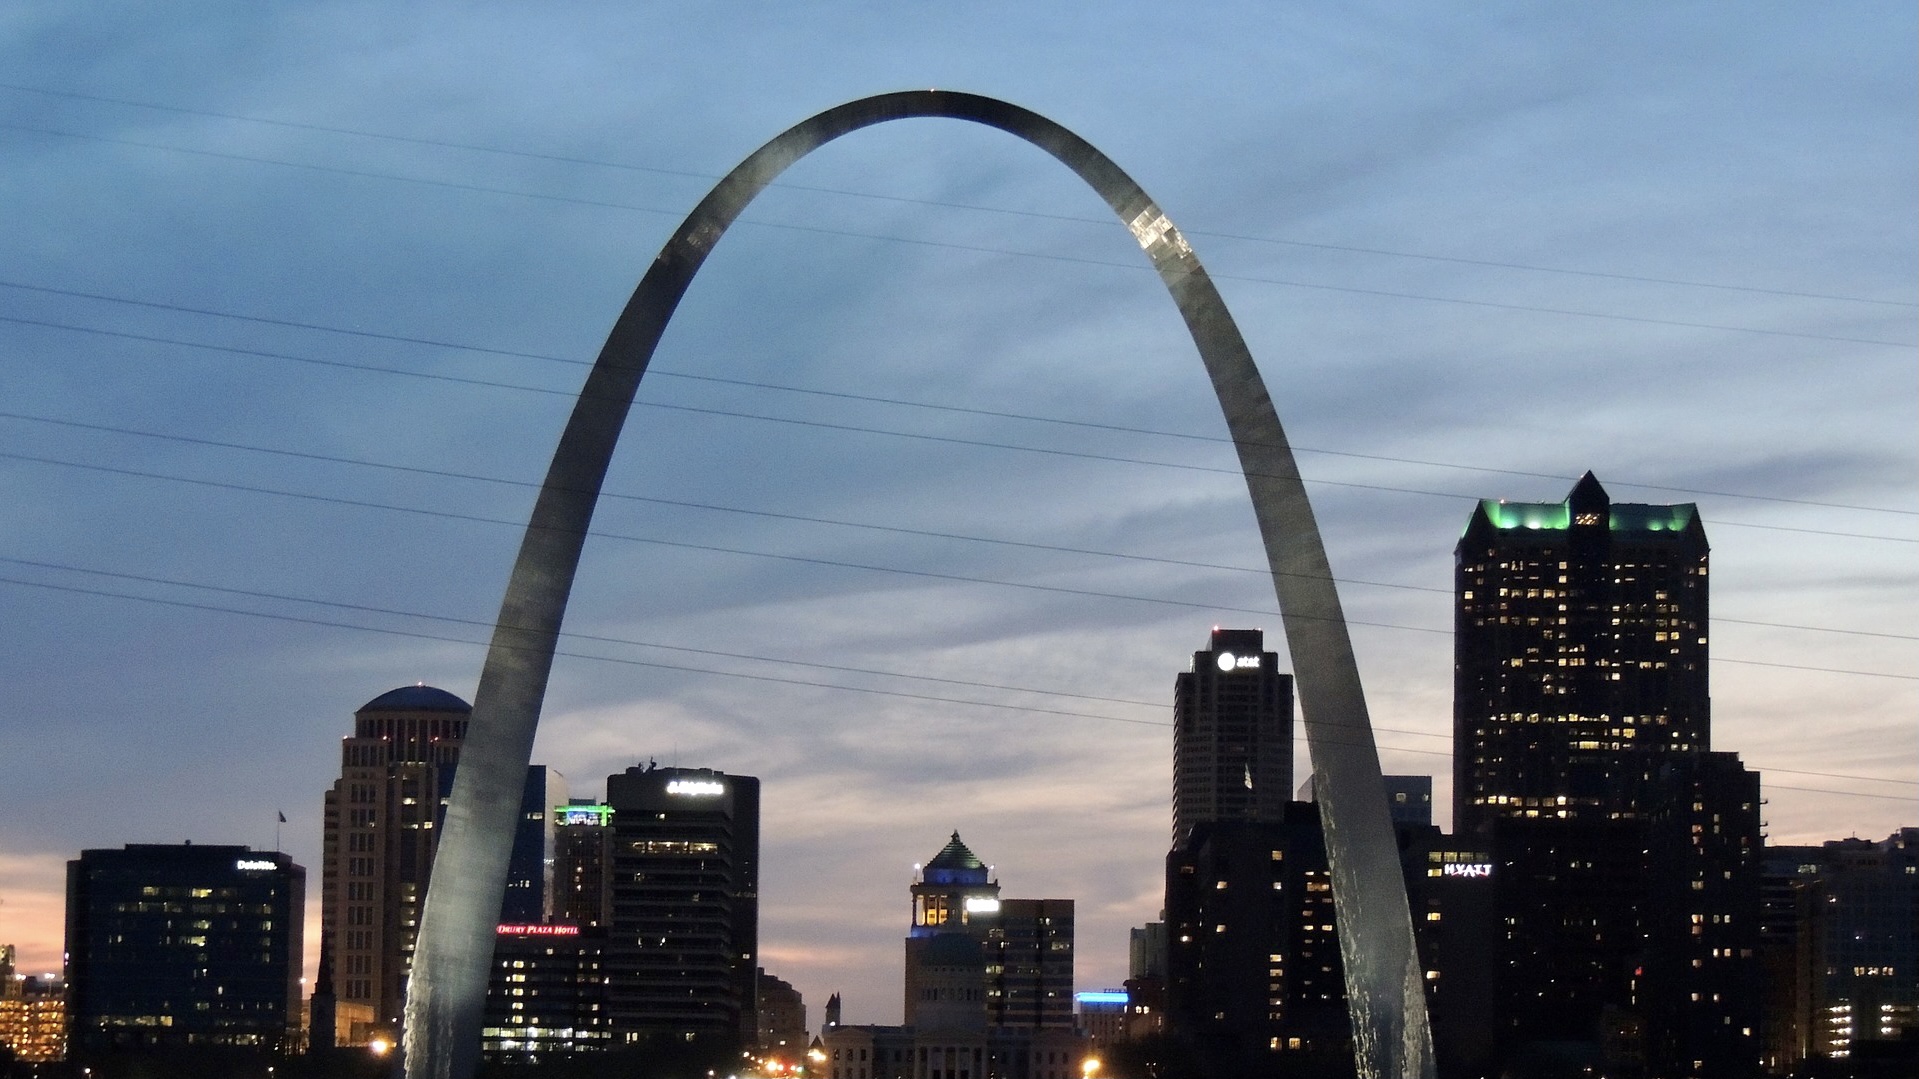 Adventist Church Leaders move General Conference Session to St. Louis, Missouri